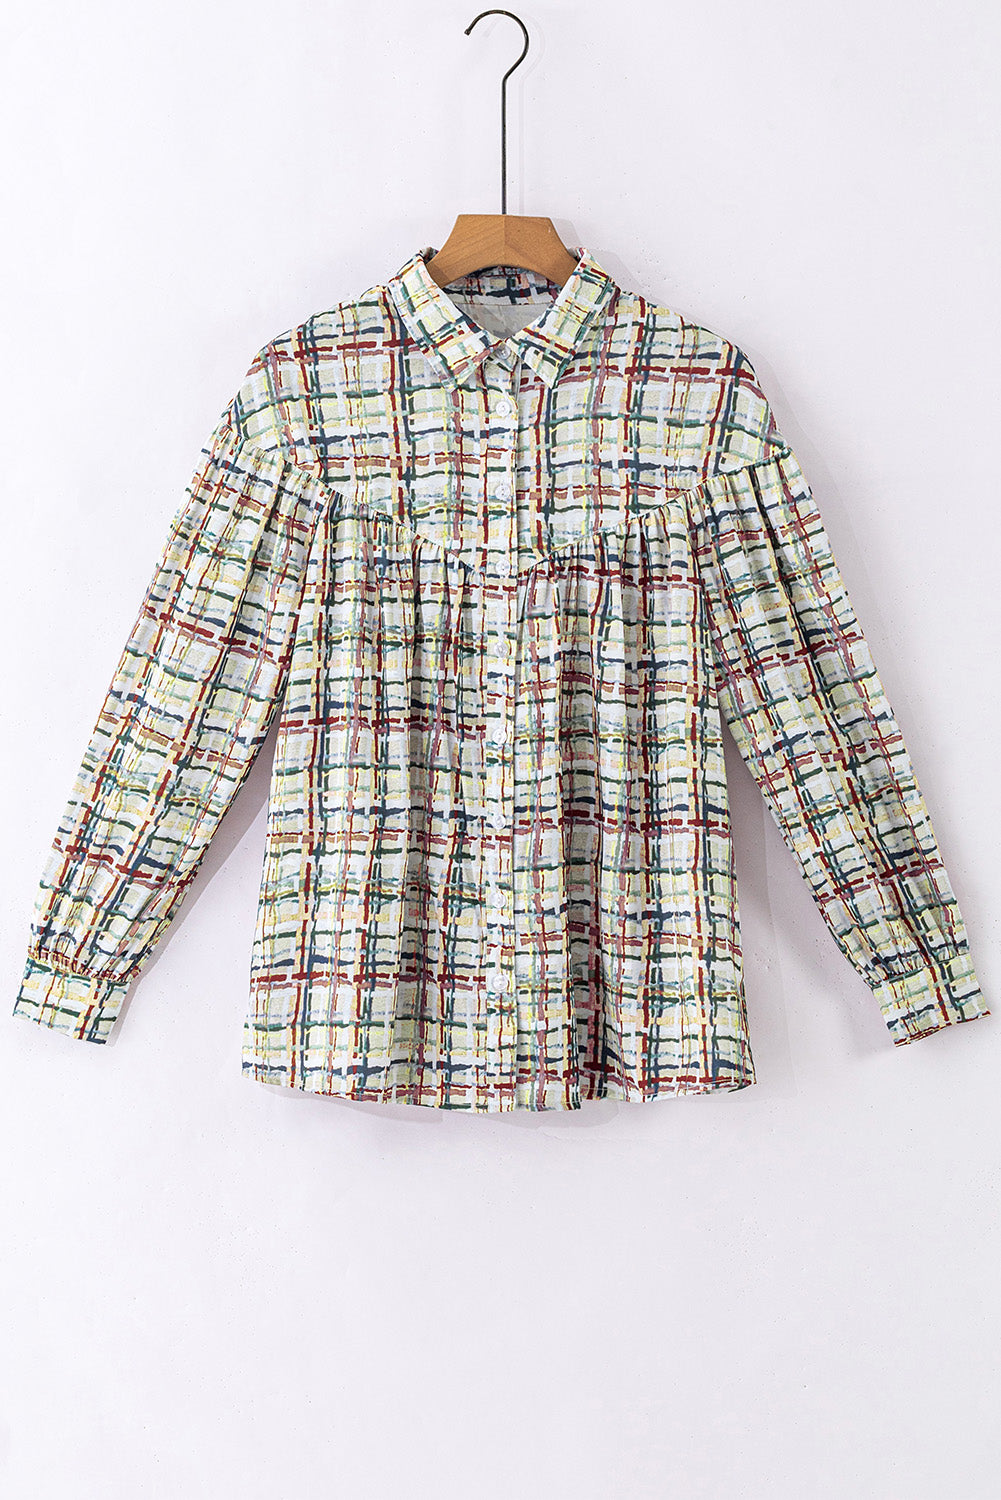 Multicolor Plaid Pattern Puff Sleeve Button up Shirt